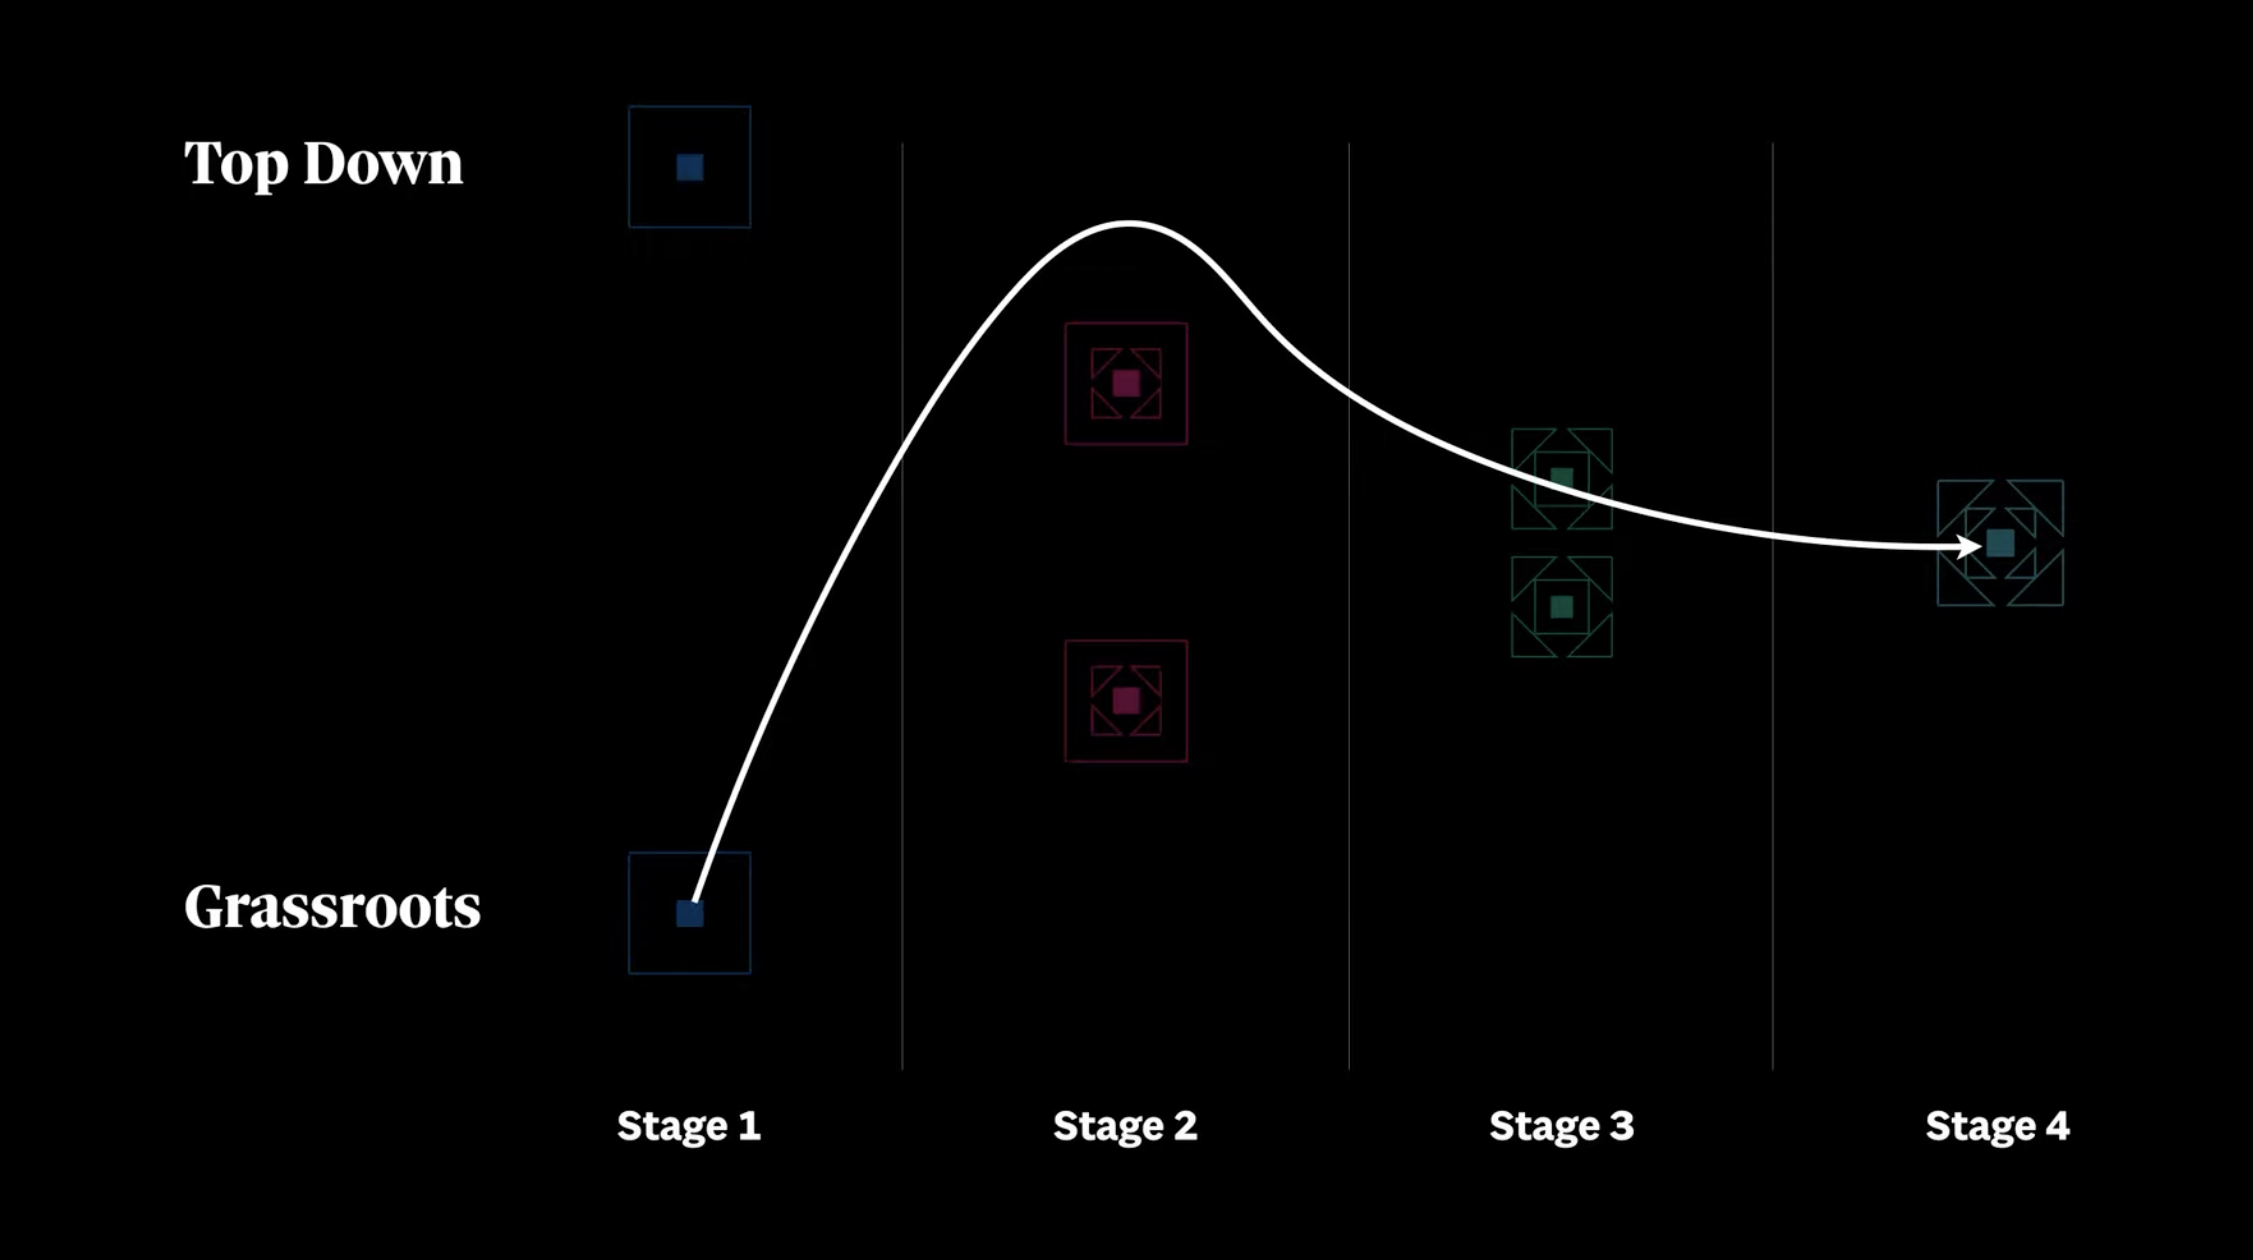 A graph showing the relationship between stages 1 to 4 in the X axis, and the variation between Grassroots and Top down on the Y axis. The curve in the graph suggests that stage 1 could be Grassroots and evolve to 100% Top down in stage 2, normalizing to 50% in the remaining graph, only as an example.